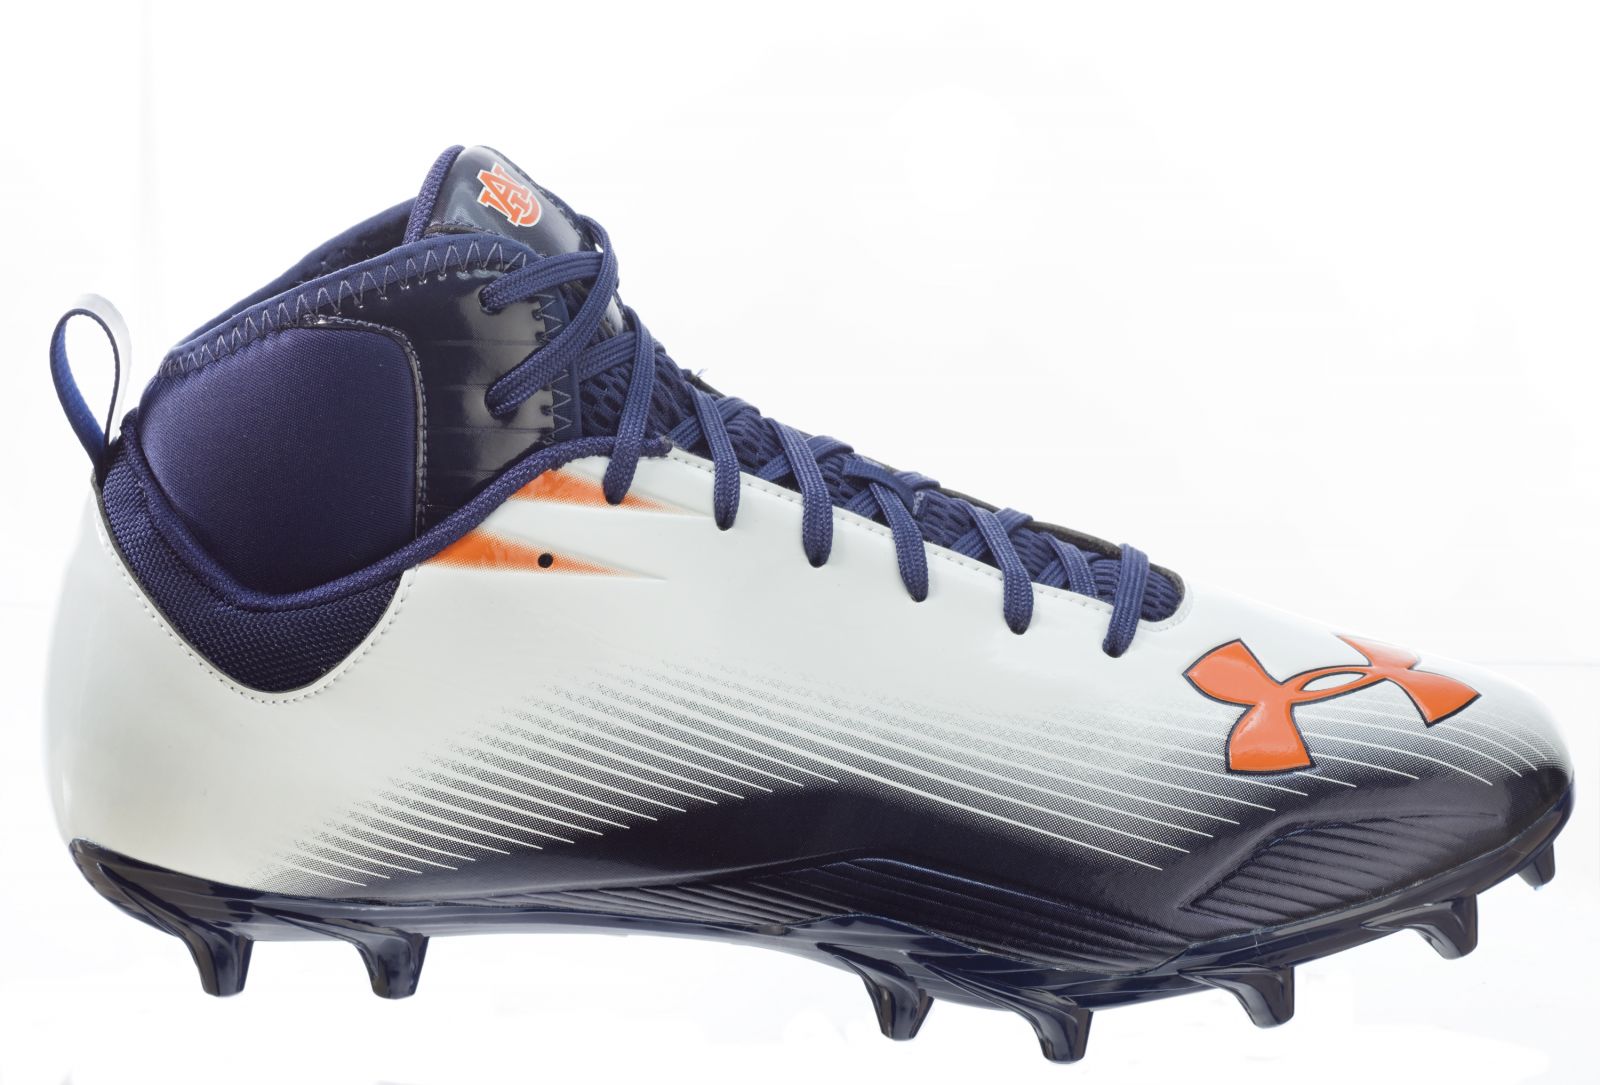 Wear Under Armour Nitro CompFit Cleat 